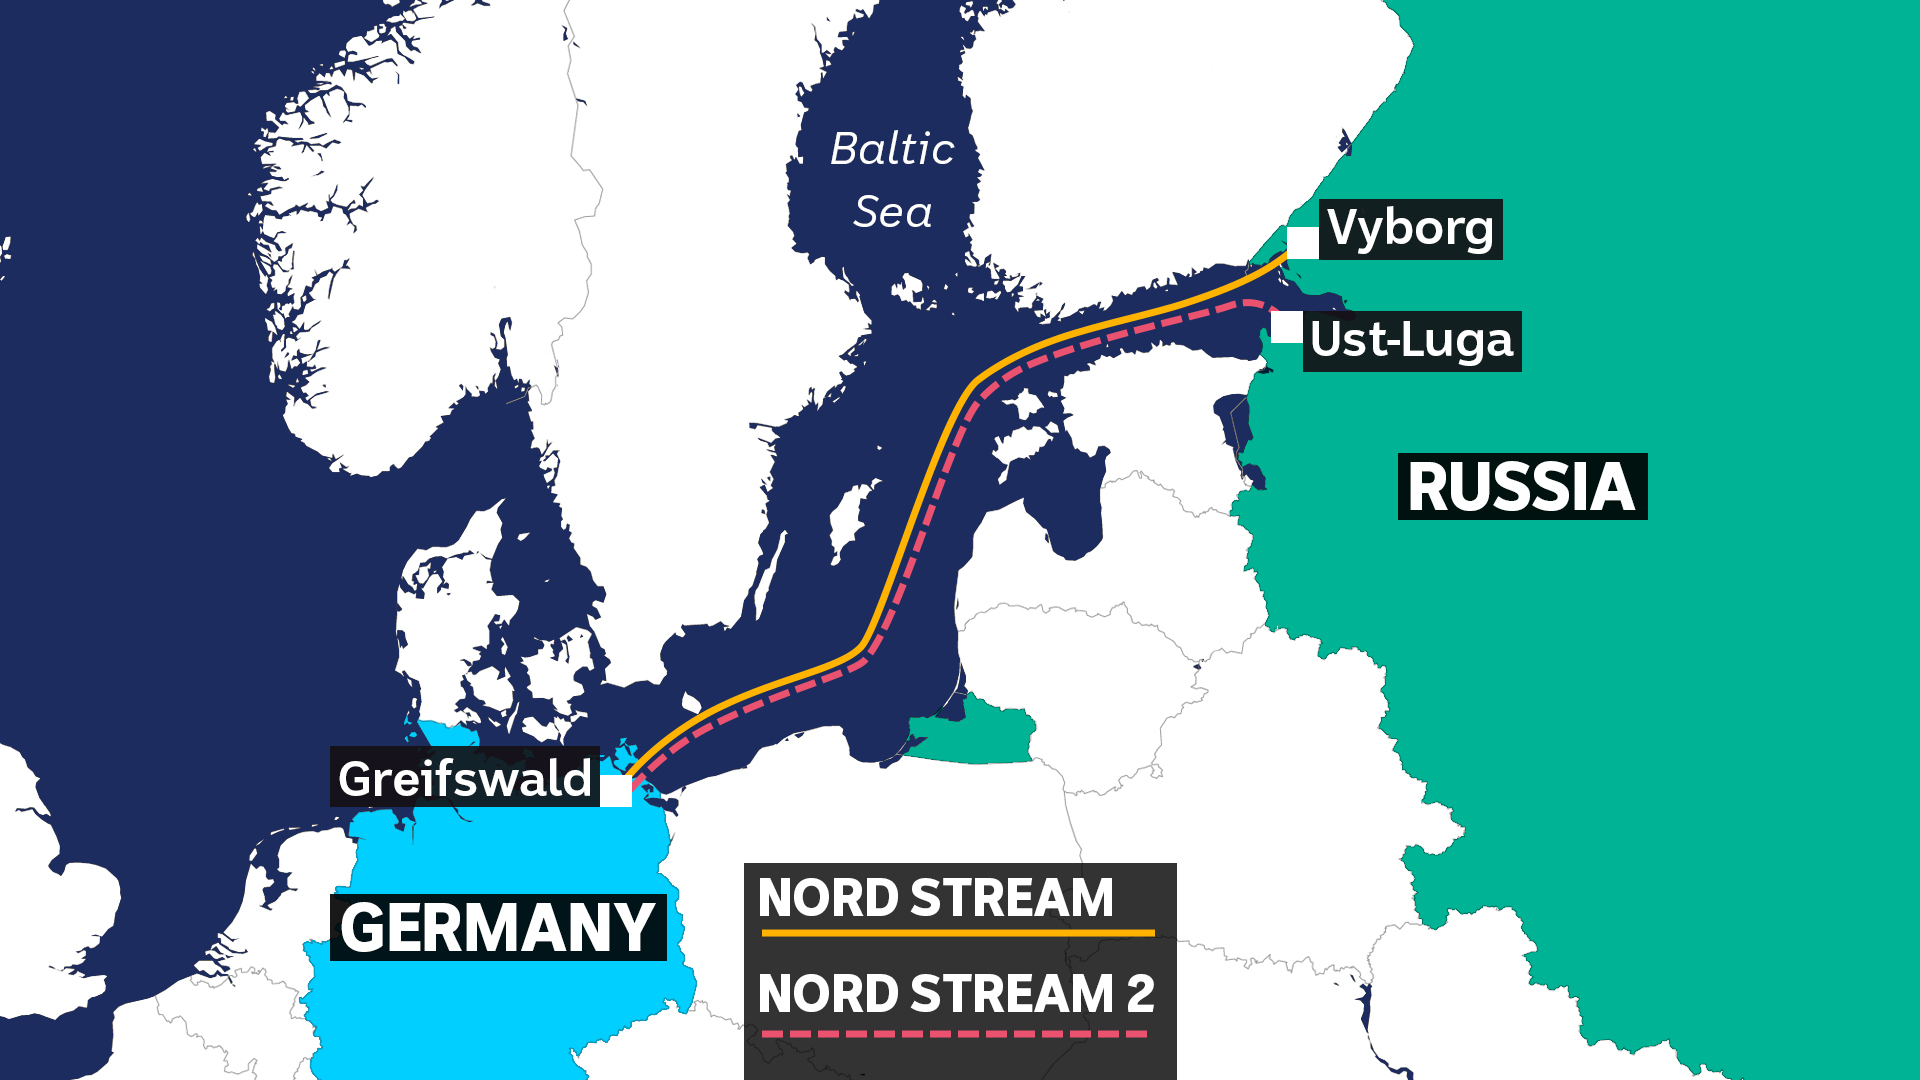 A map showing the Nord Stream 2 pipelines from Russia to Germany under the Baltic Sea.